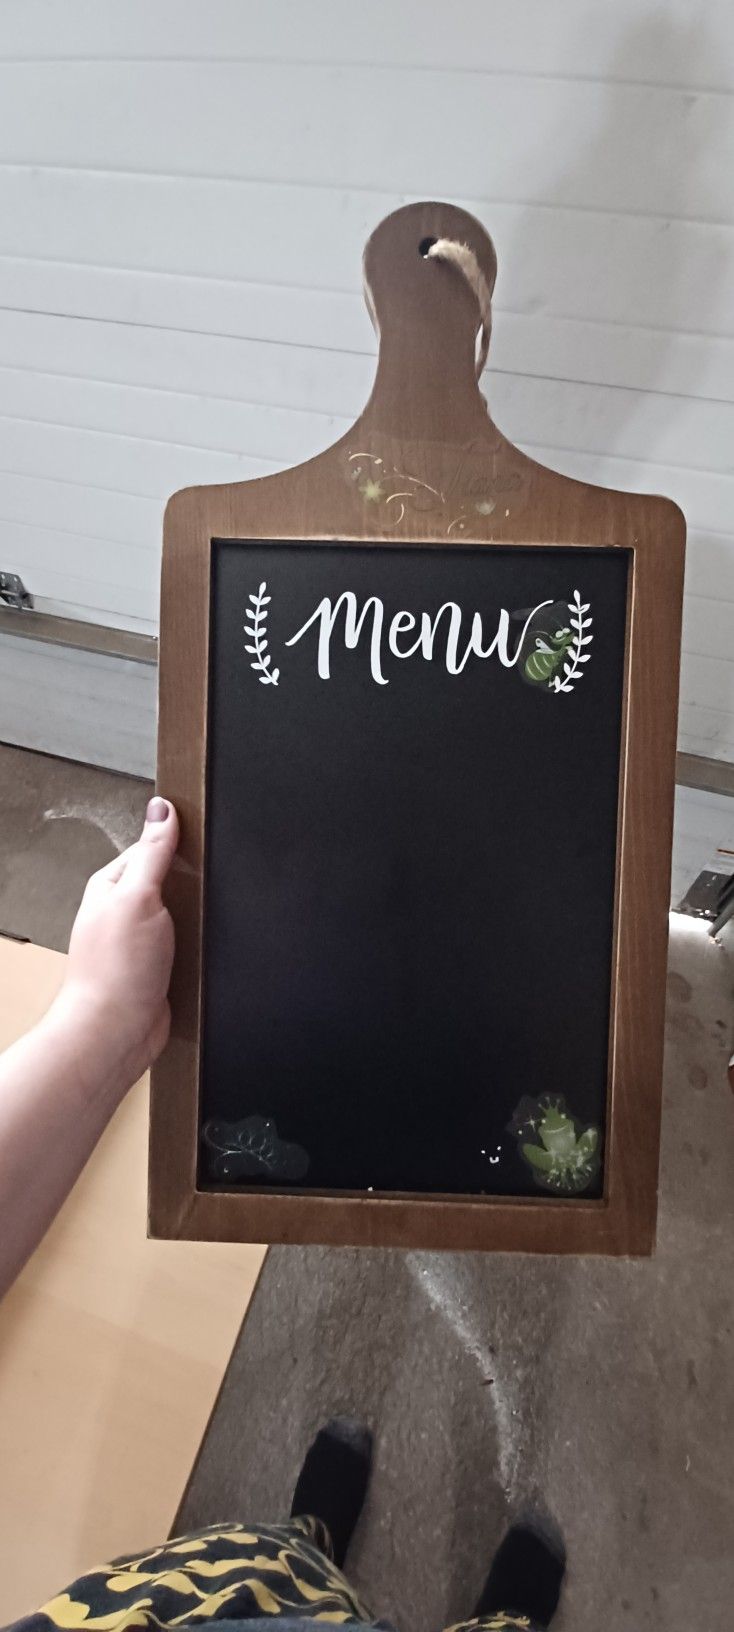 Menu Chalk Board With Tiana Decals On It